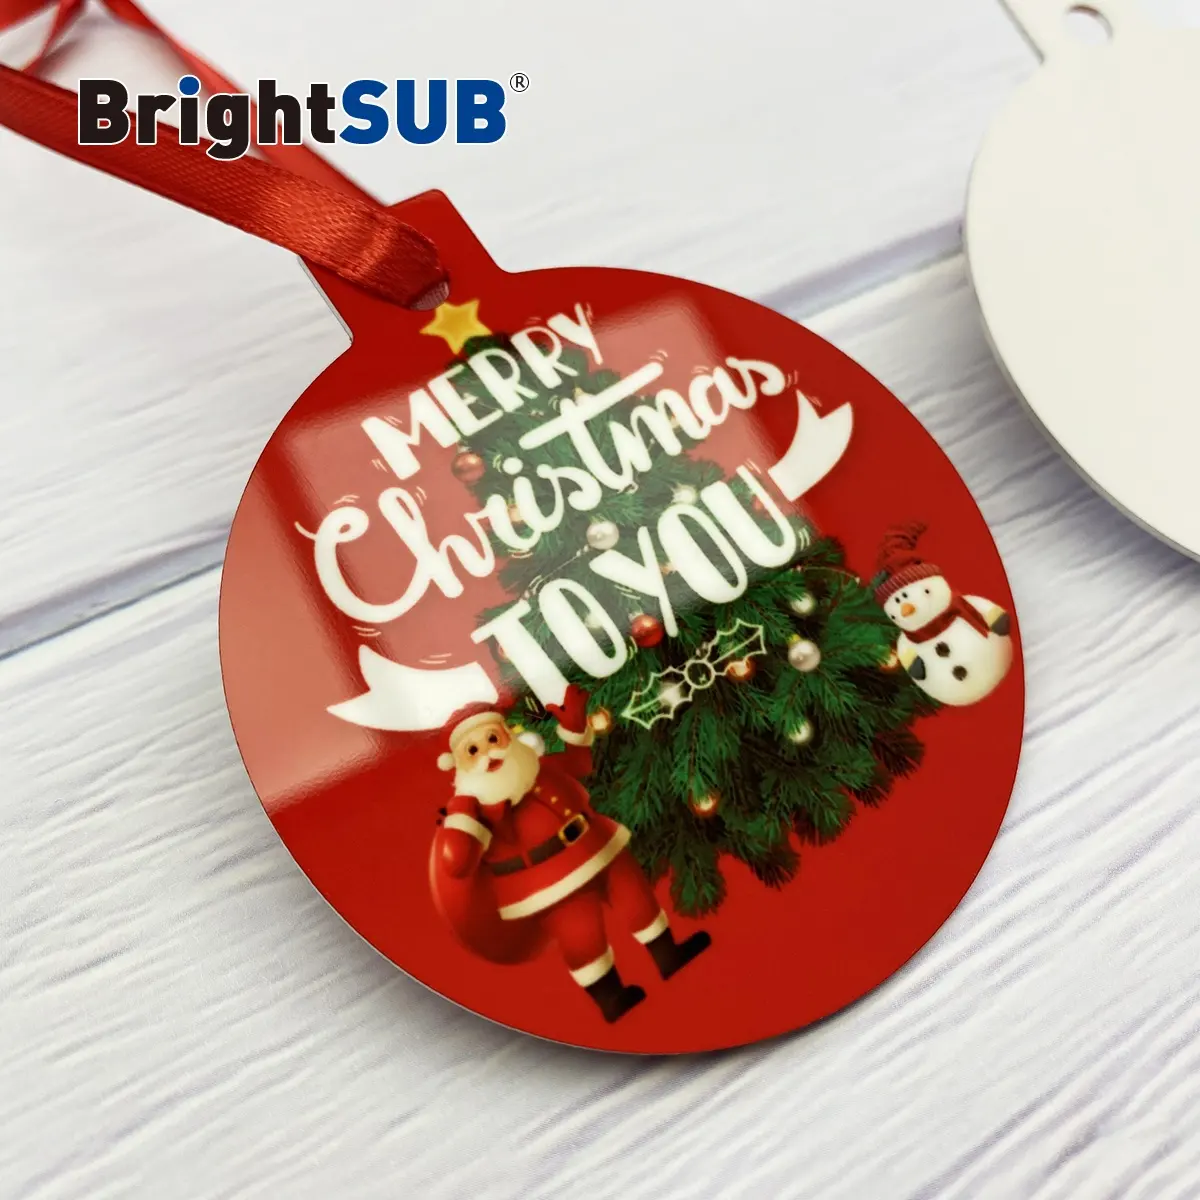 Ornament White Blanks 1.0mm Double-sided Brightsub Matte White Sublimation Aluminum Christmas Ornaments Snowflake Metal Blanks Decoration